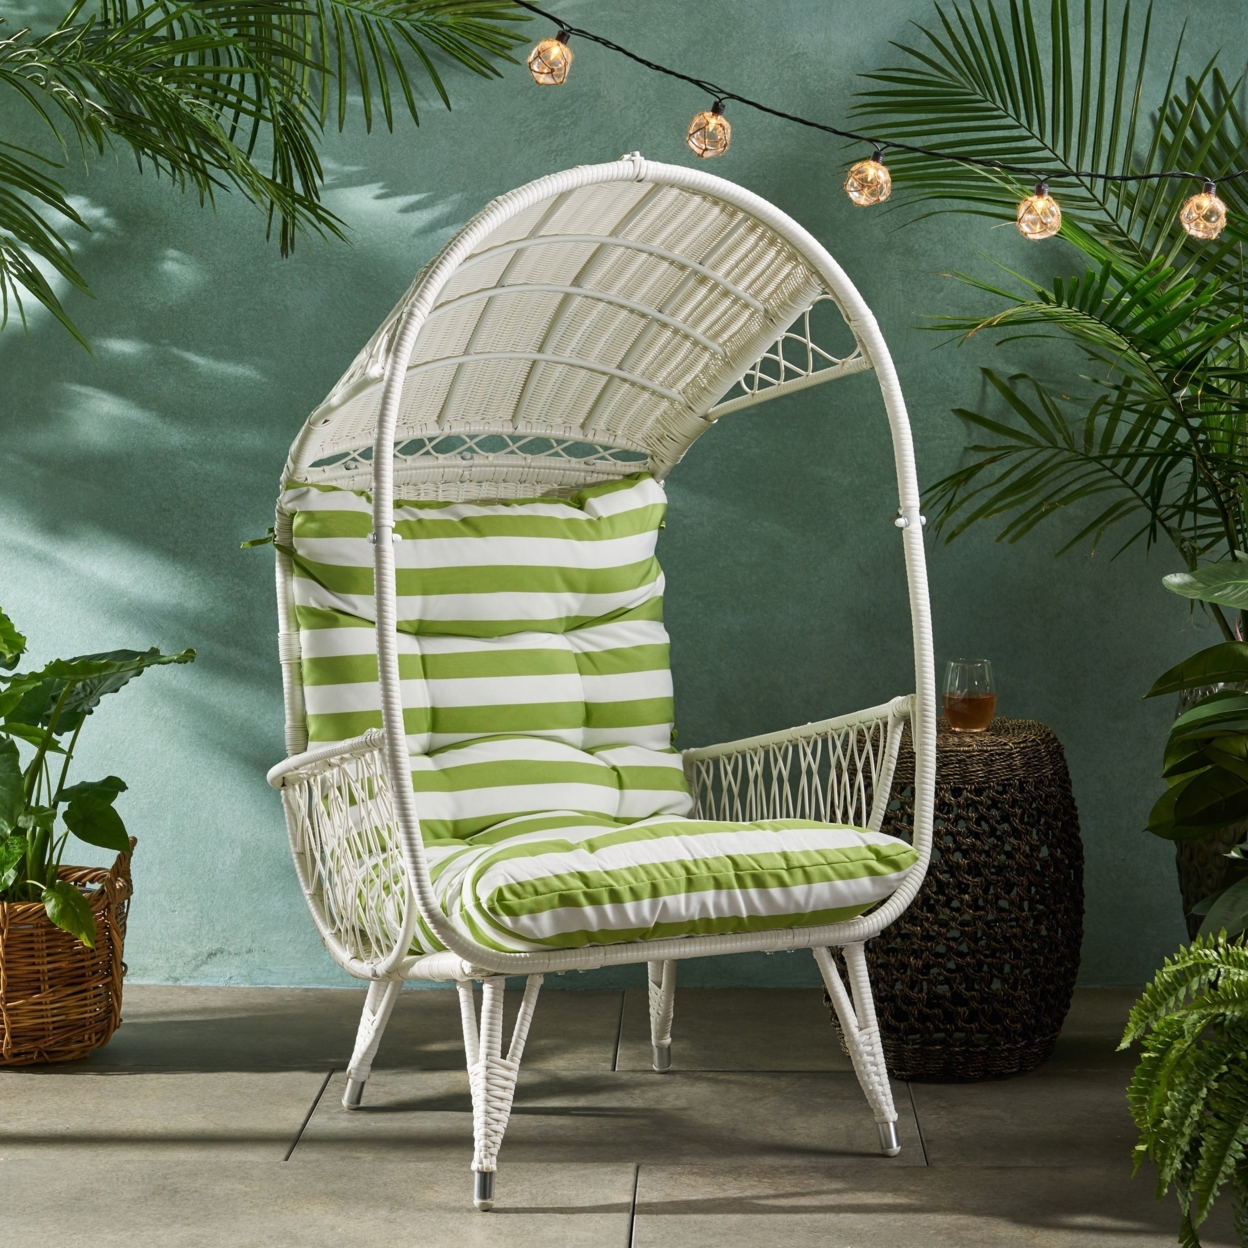 Primo Outdoor Wicker Freestanding Basket Chair - White / Green